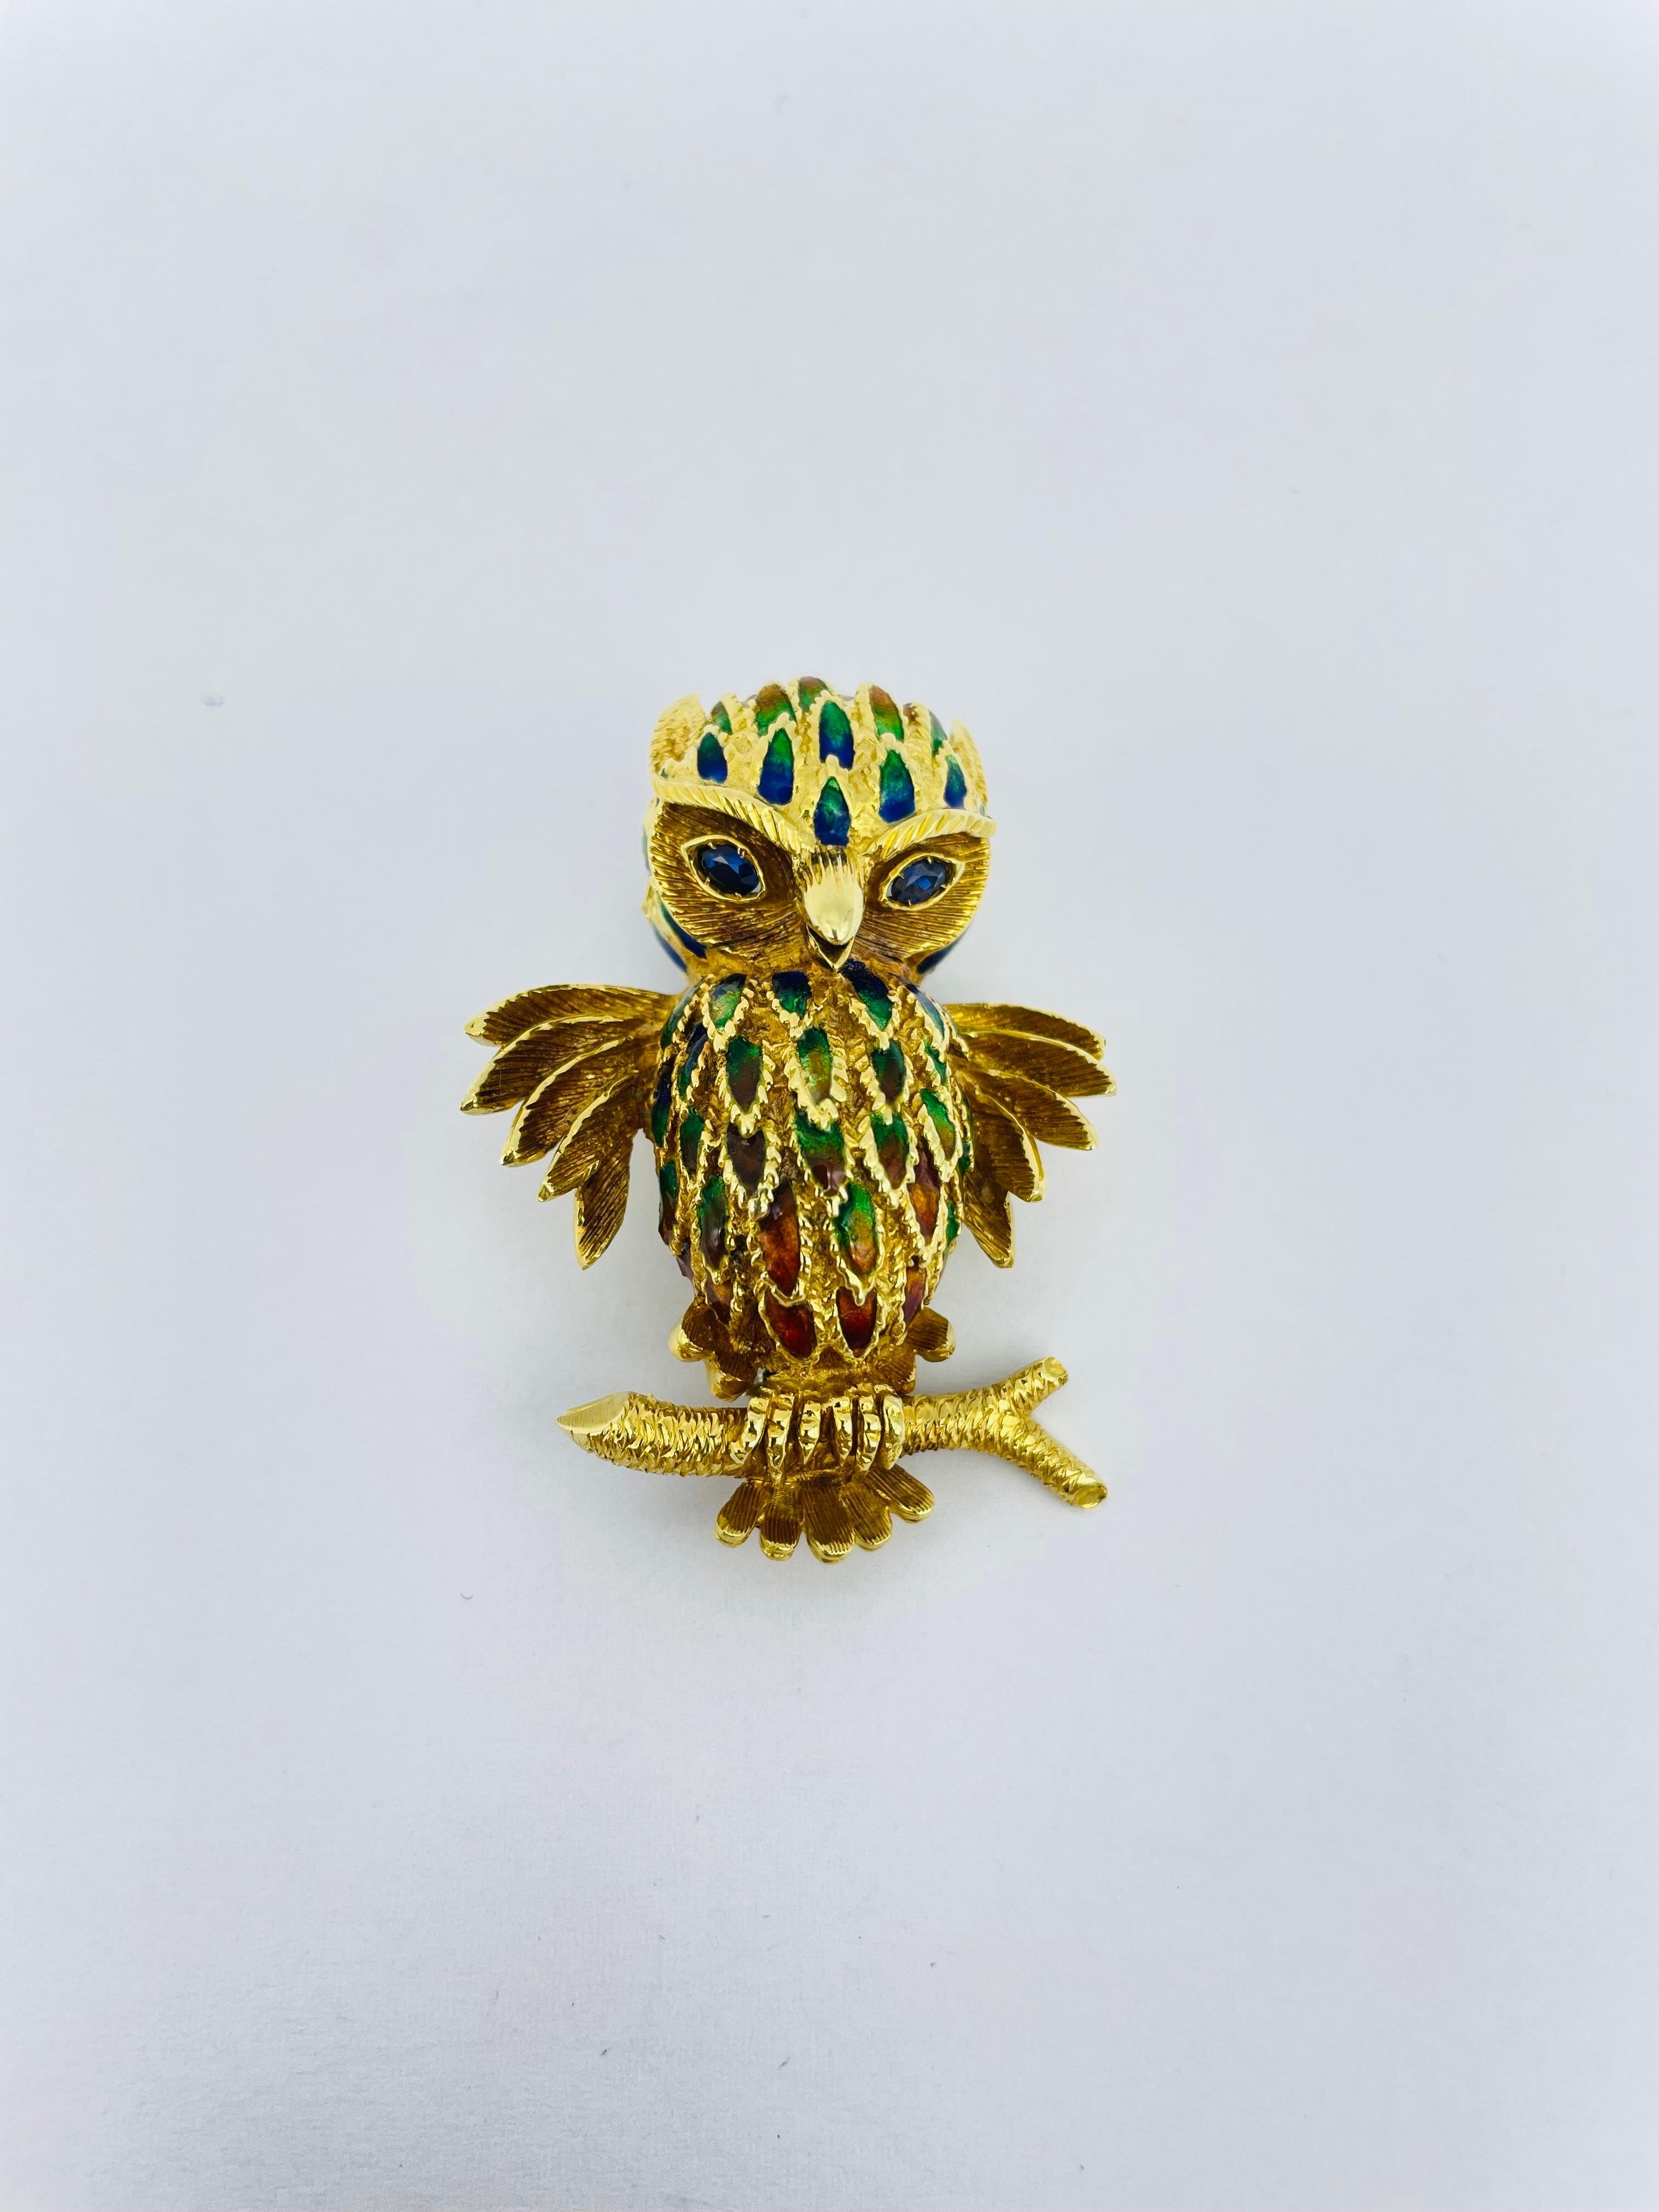 This exquisite owl brooch is a true masterpiece of craftsmanship and artistry. Made of 18k yellow gold, it is both elegant and charming. The owl's form is expertly crafted, with attention paid to every detail, from the wings to the feathers on its